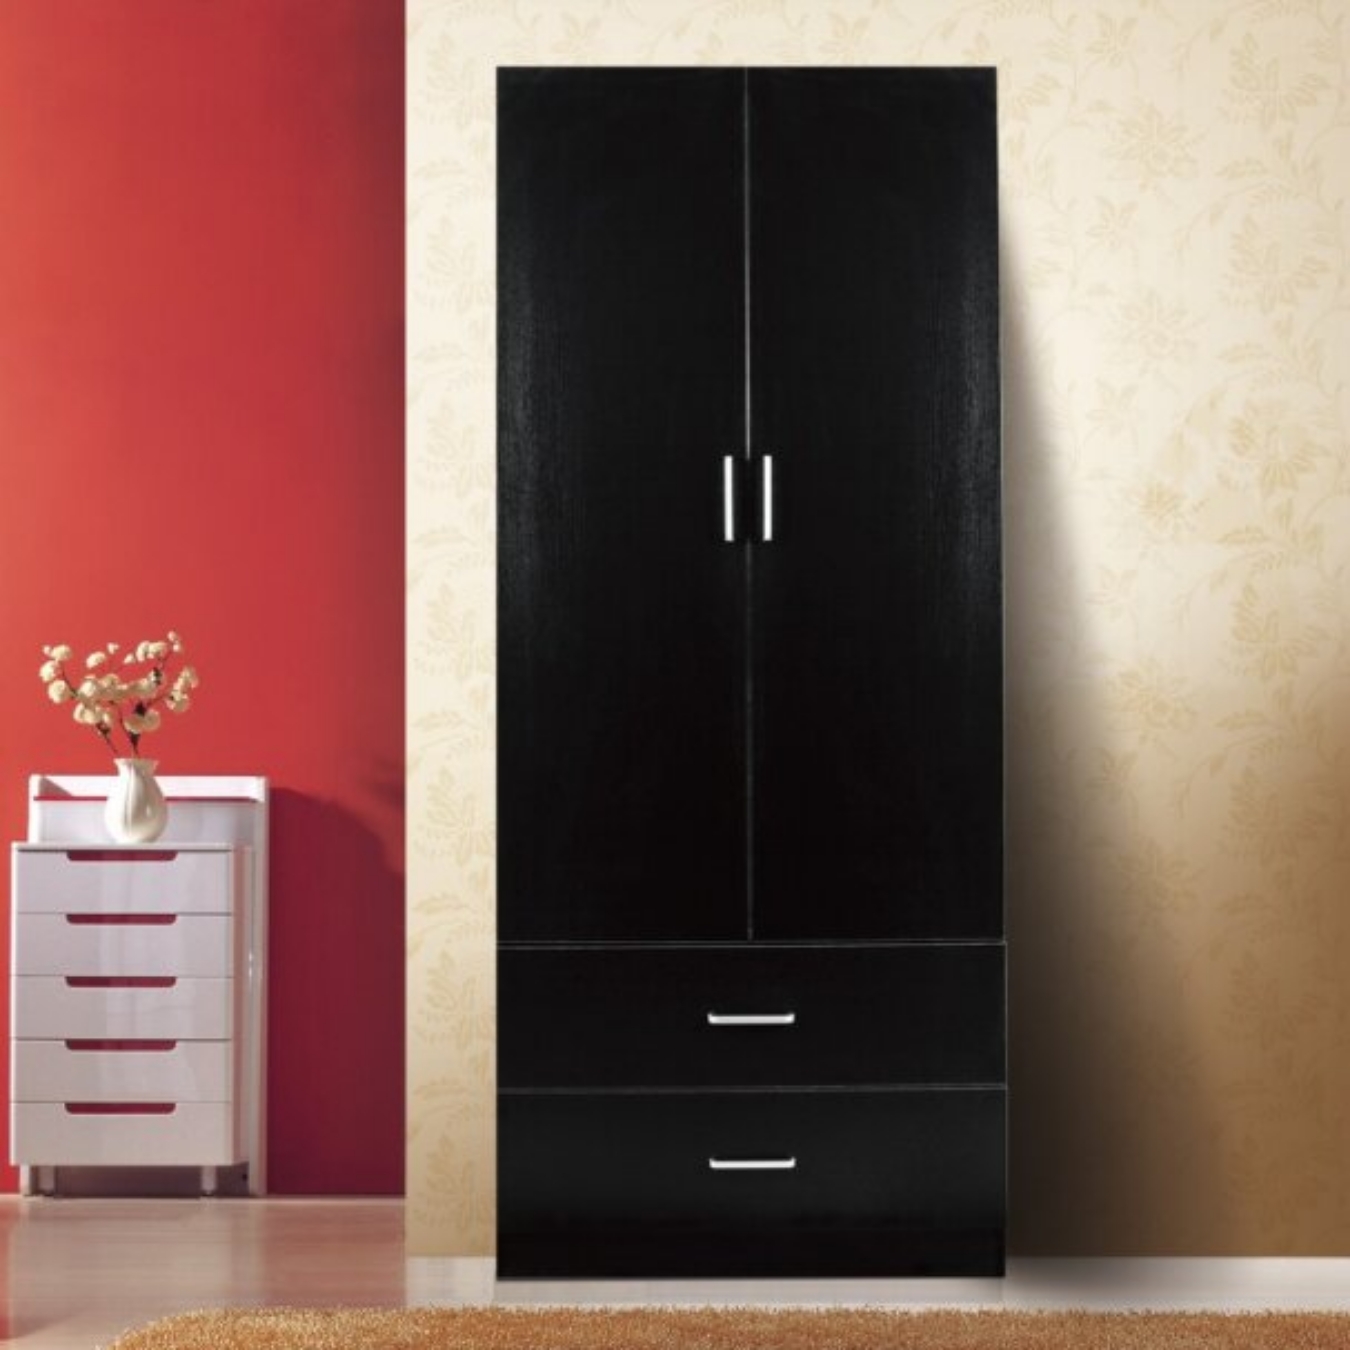 Simple and sleek, the HEQS Redfern 2 Door Wardrobe will bring handy storage and functionality to your home